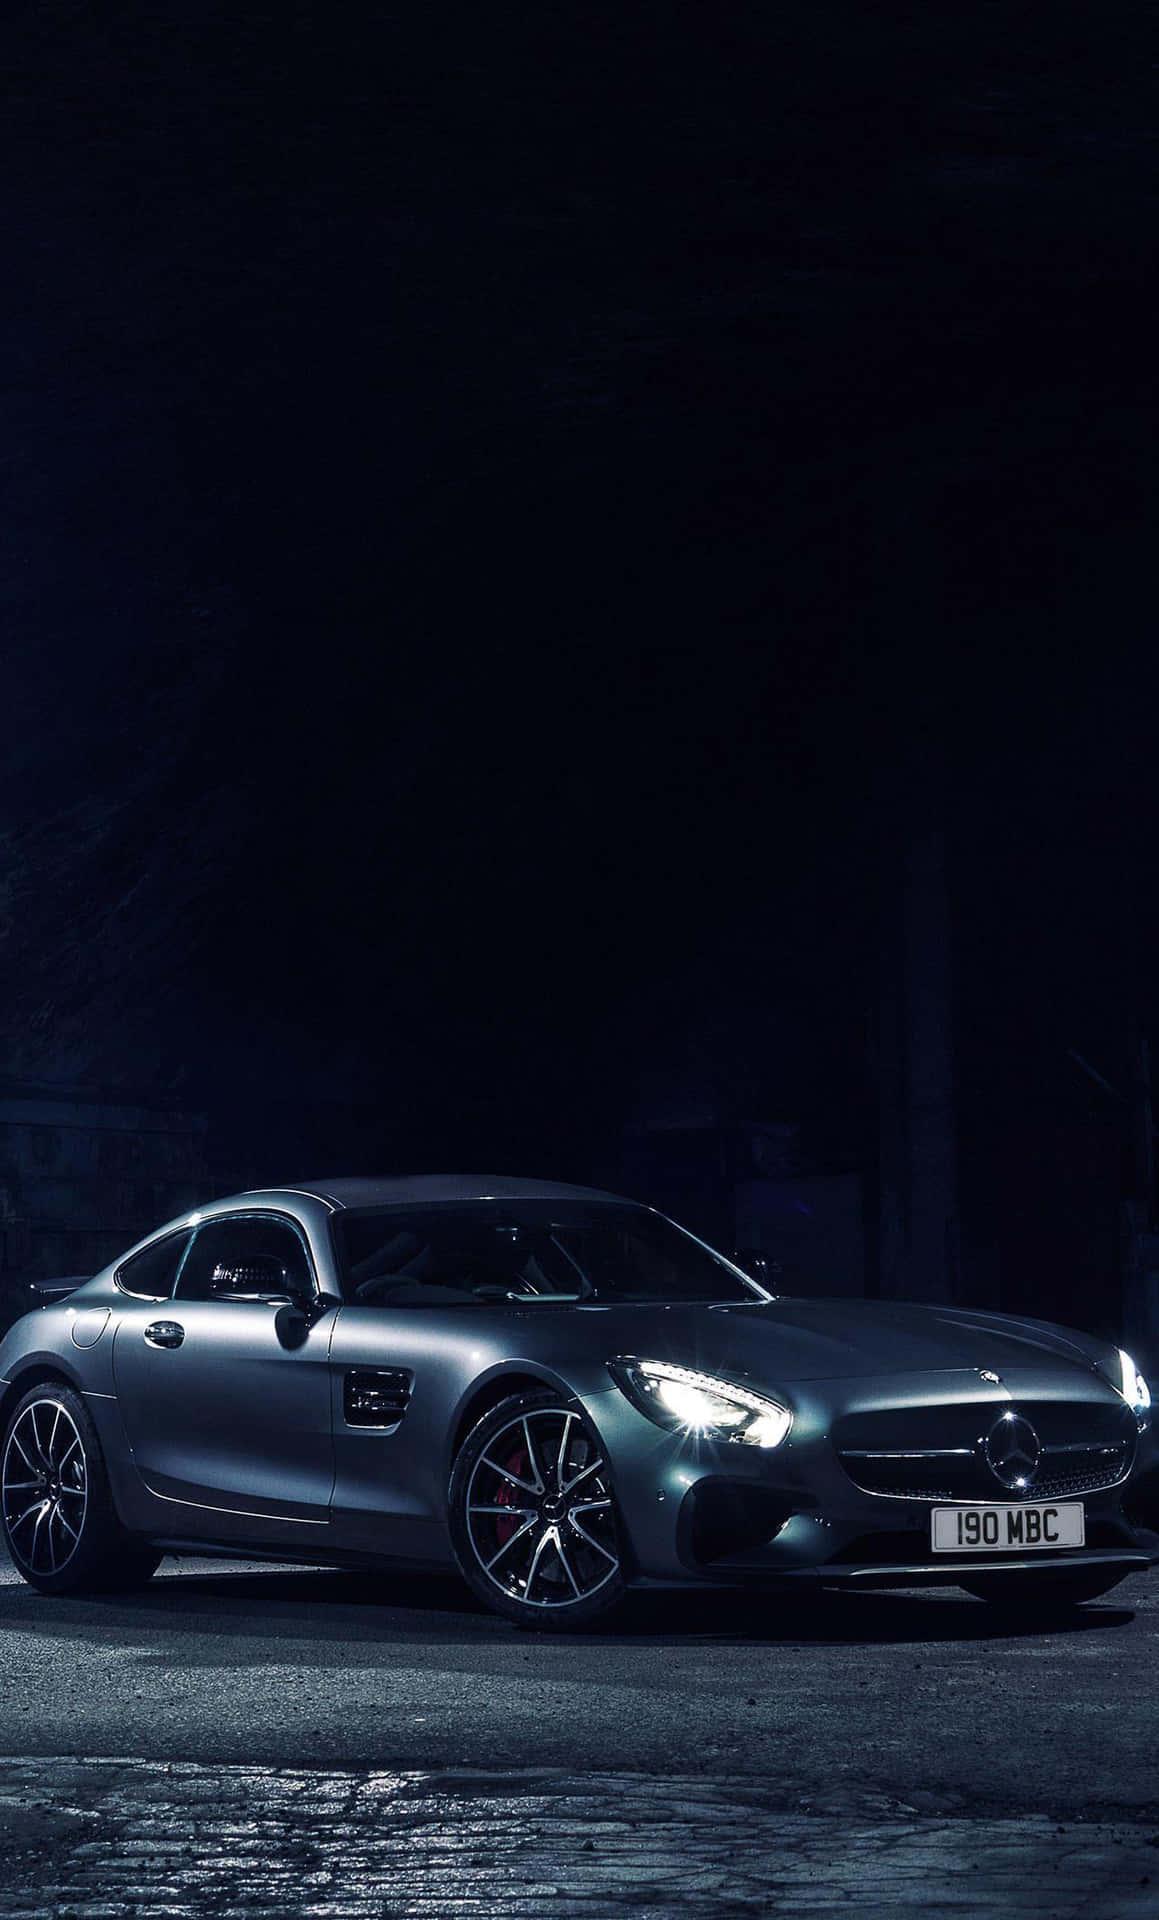 Ride in Style with a Mercedes Benz Iphone Wallpaper